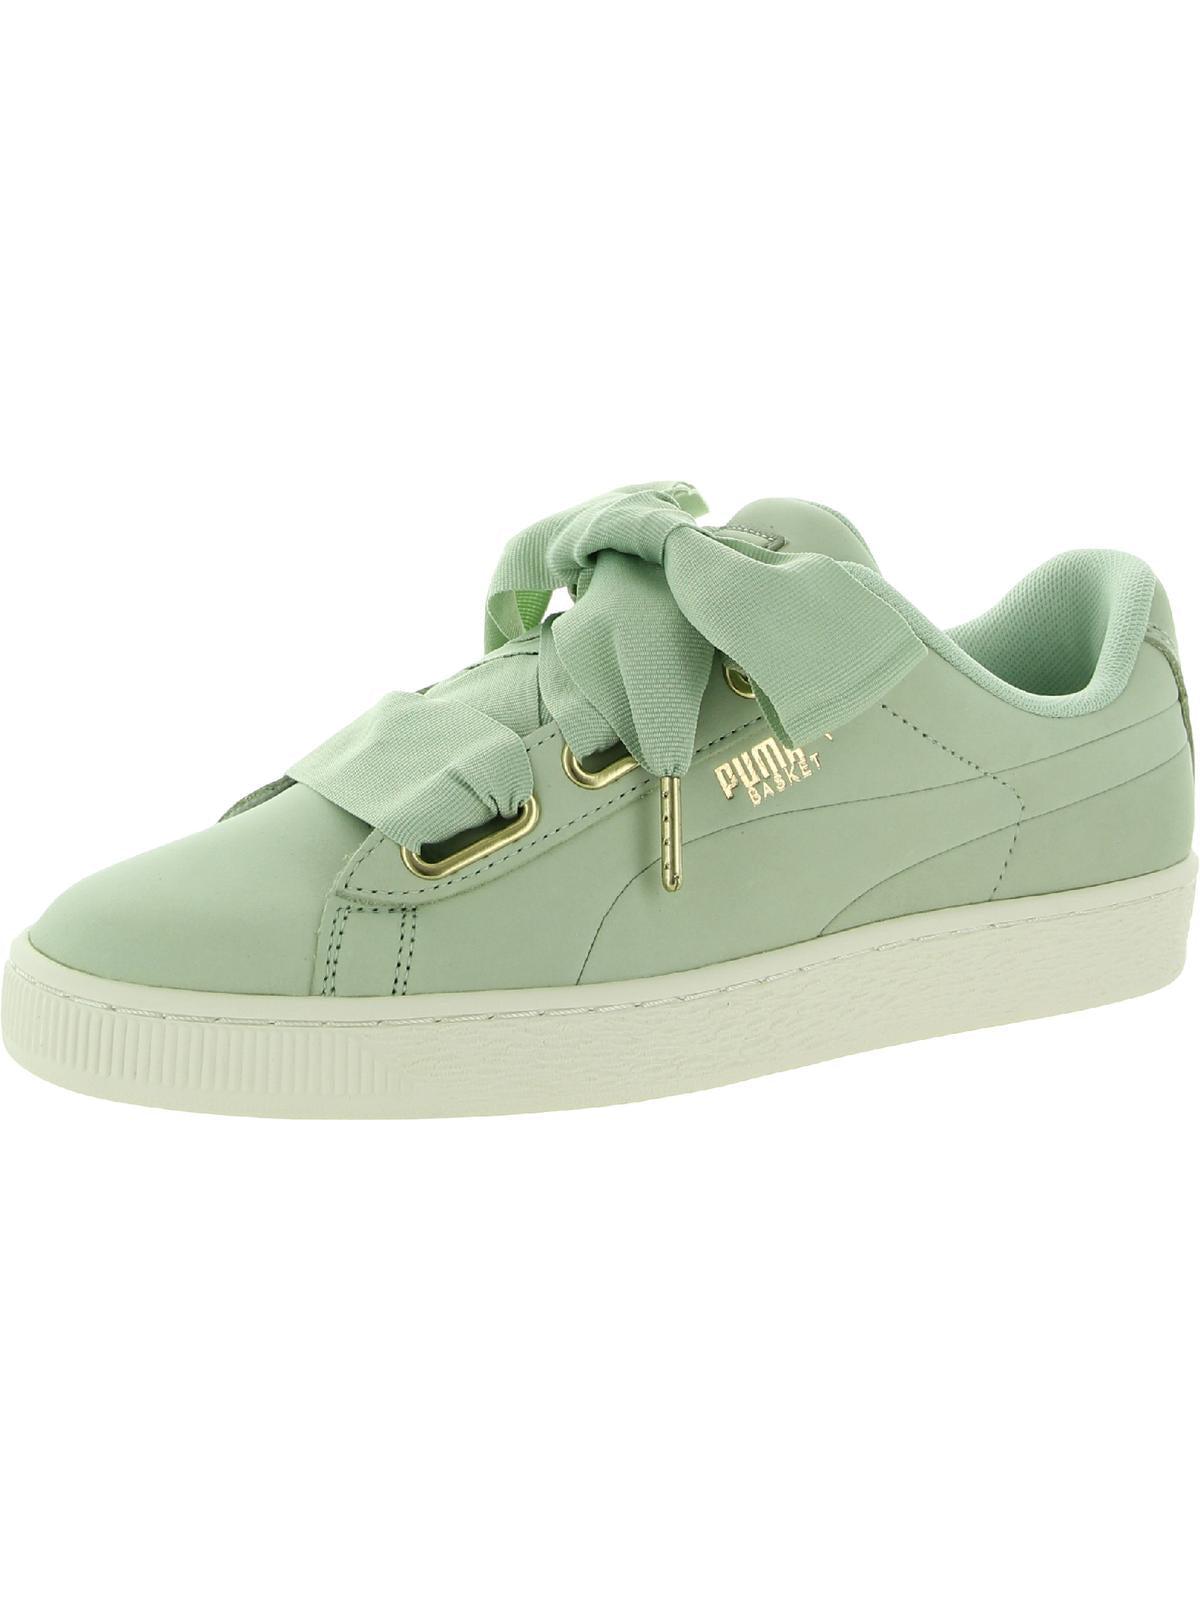 PUMA Basket Heart Soft Nubuck Lifestyle Casual And Fashion Sneakers in  Green | Lyst